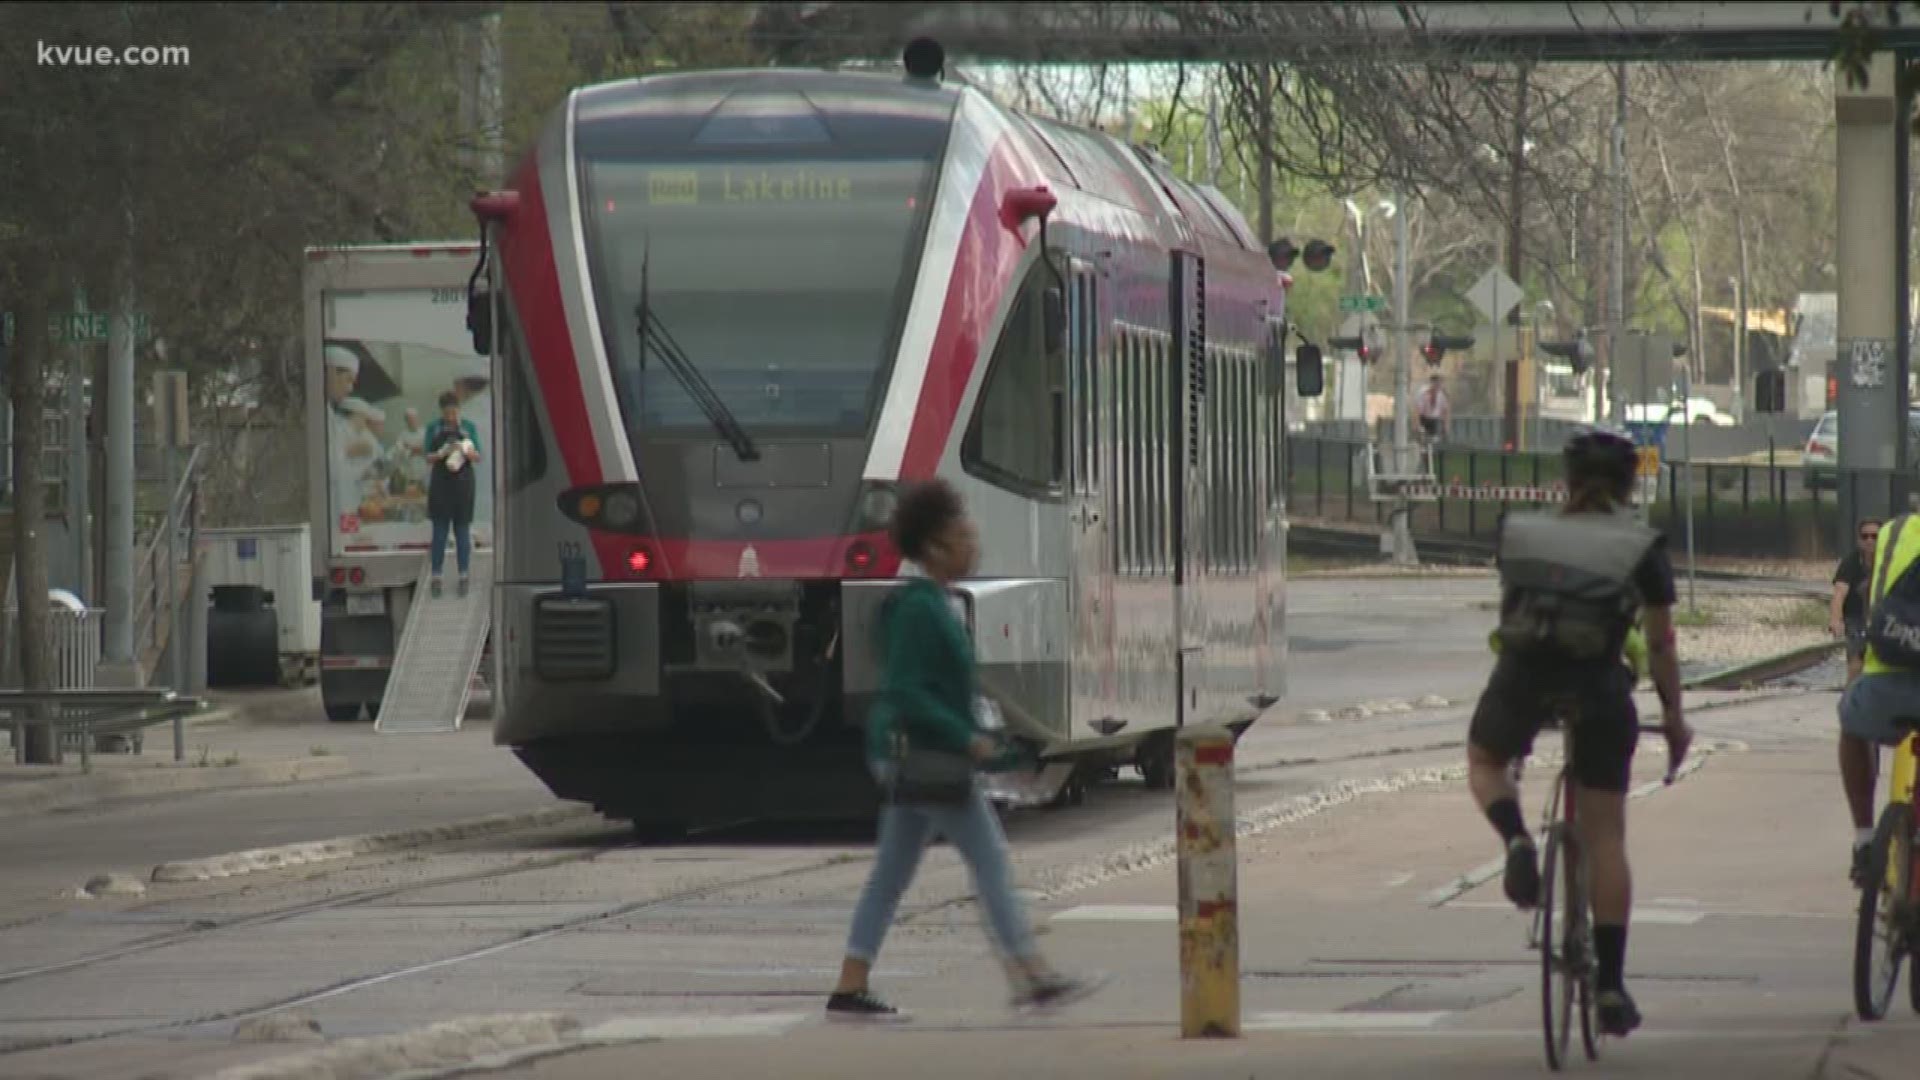 CapMetro is expected to vote next month on allowing kids from Kindergarten through 12th to ride the bus for free.